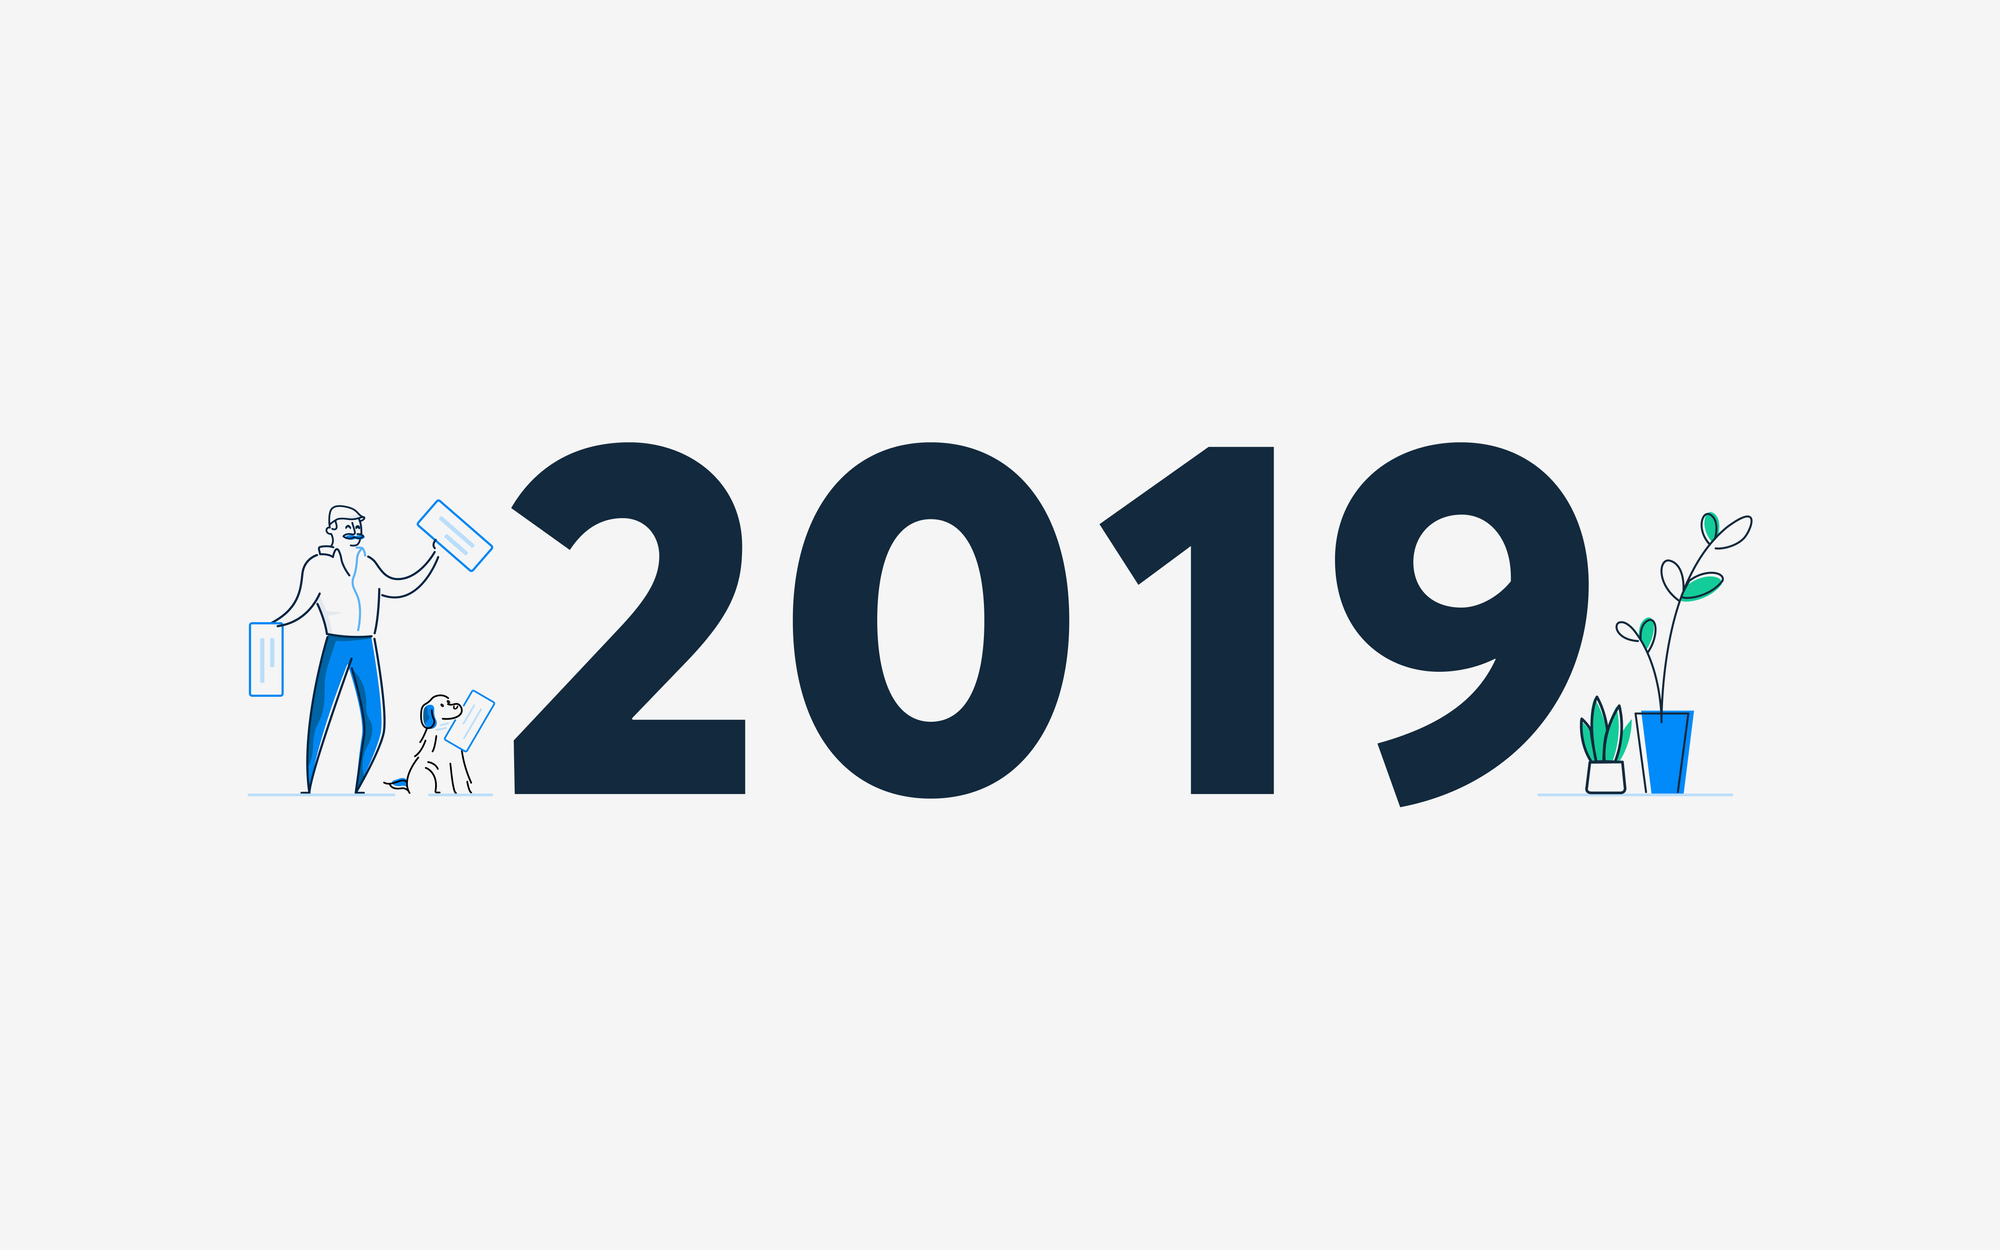 RotaCloud 2019 year in review [infographic]